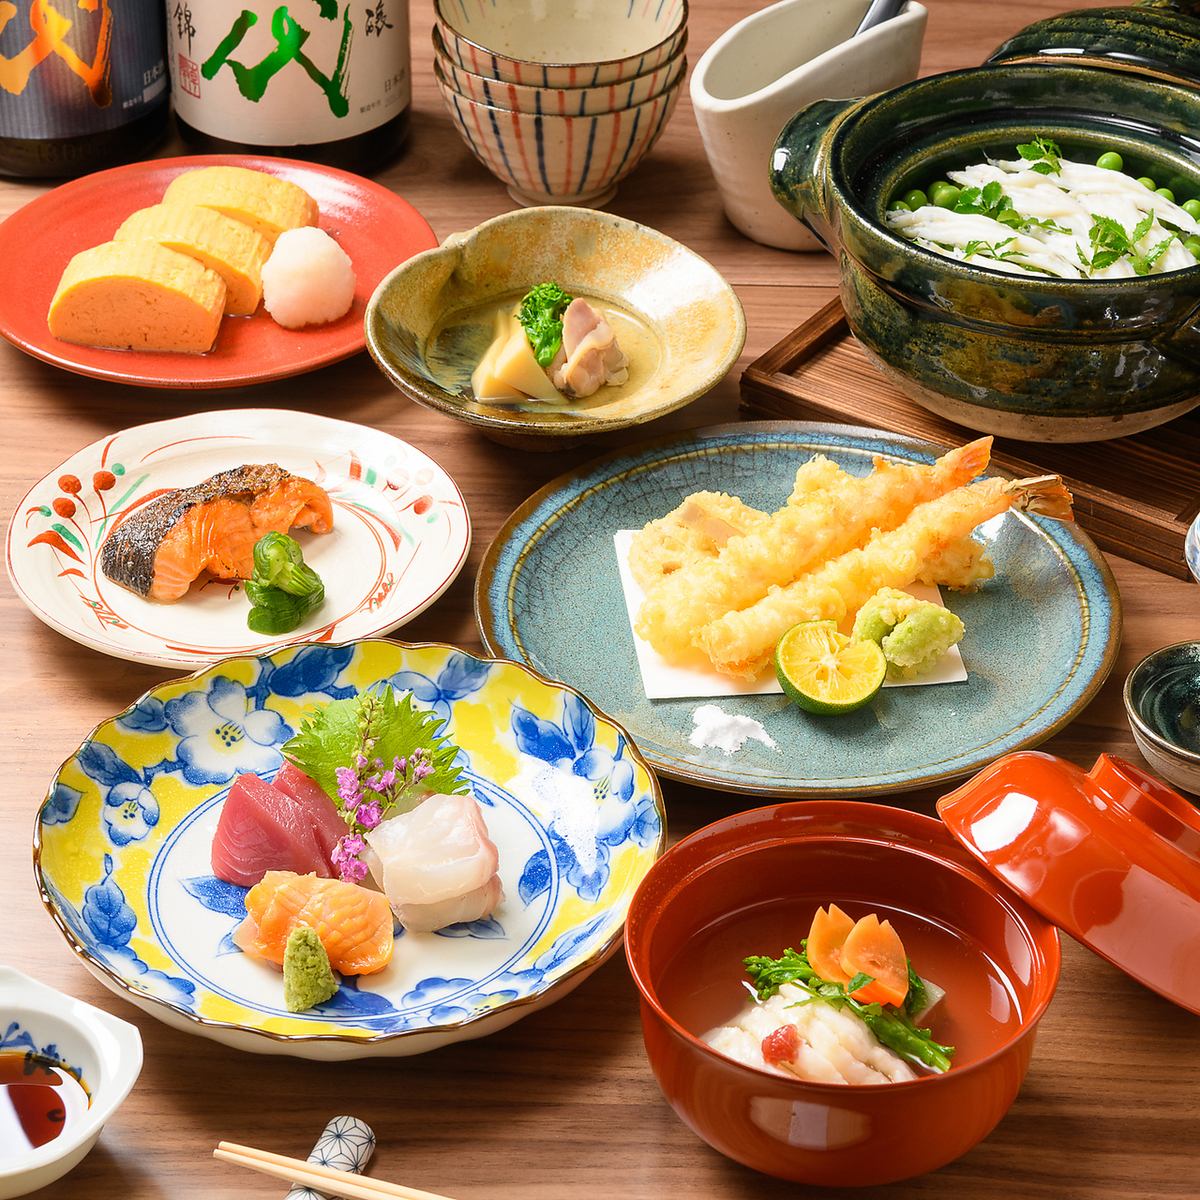 We offer Japanese cuisine with a delicate and soft flavor, with special attention to the soup stock.